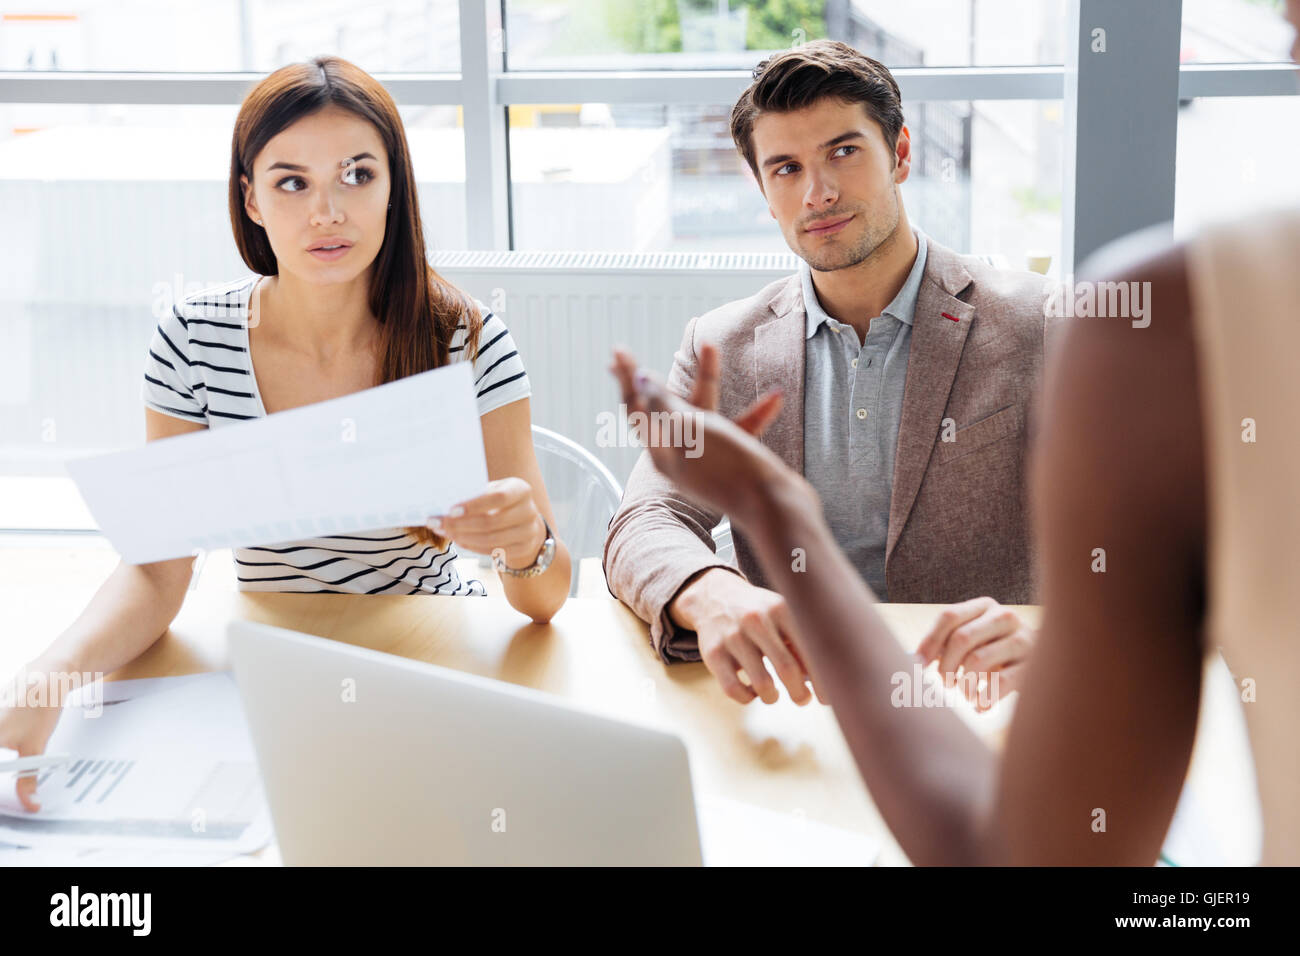 Three concentrated young businesspeople working with documents and using computer in office together Stock Photo